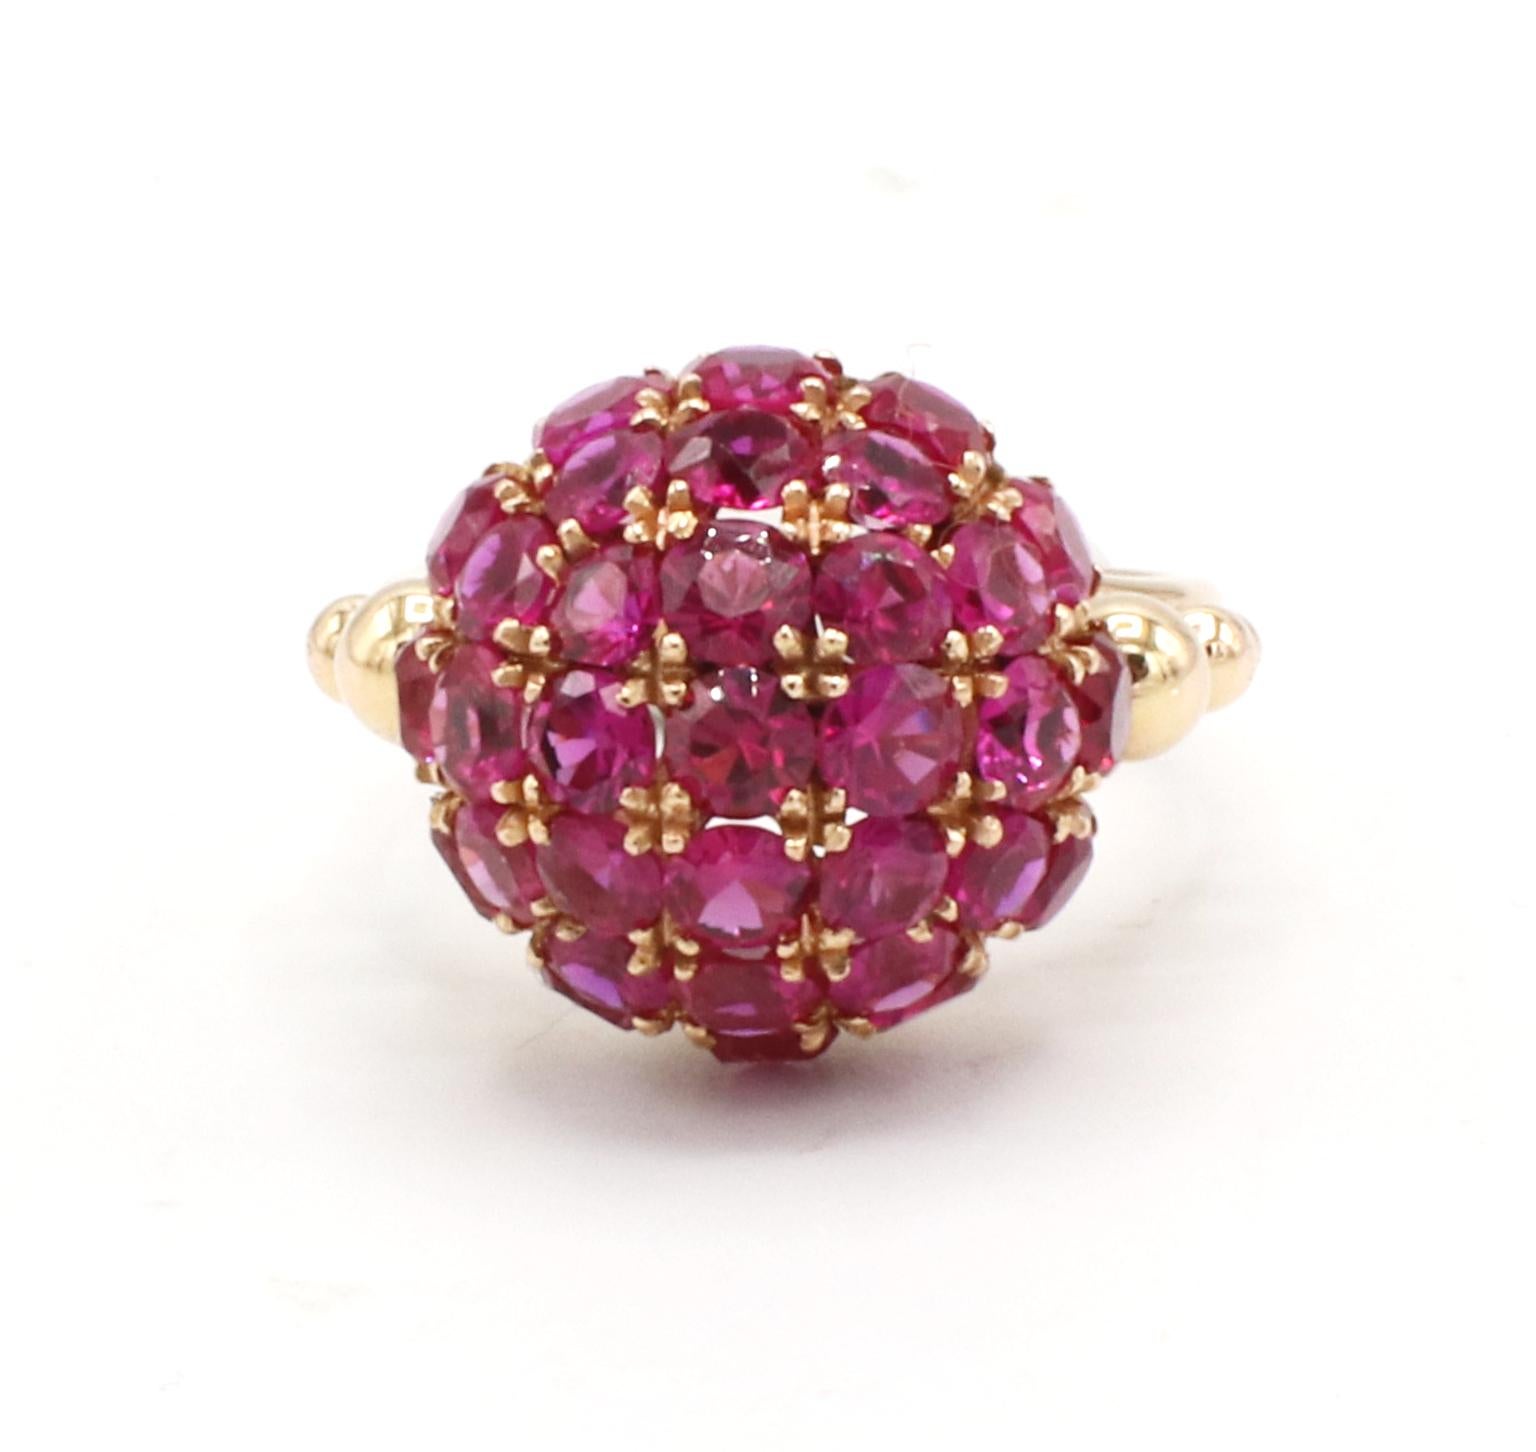 Retro 14 Karat Yellow Gold Ruby Round Stone Cluster Dome Ring 
Metal: 14k yellow gold
Weight: 7.13 grams
Top: 15.5 x 15.5mm
Size: 5.75 (US)
Height: 12.5mm
